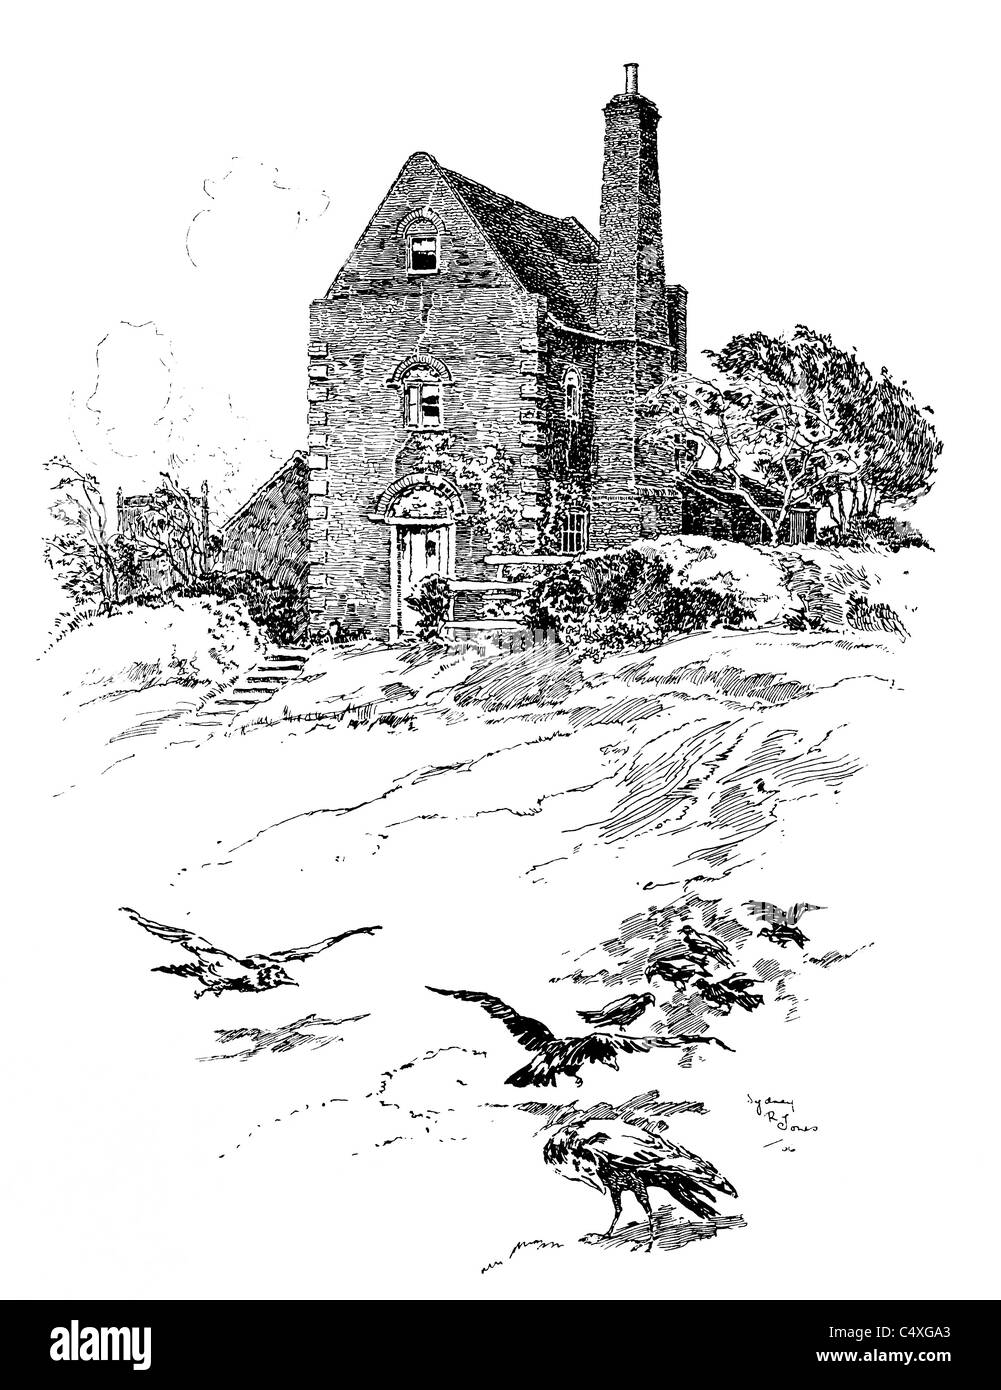 Weston, Suffolk - pen and ink illustration from 'Old English Country Cottages' by Charles Holme, 1906. Stock Photo